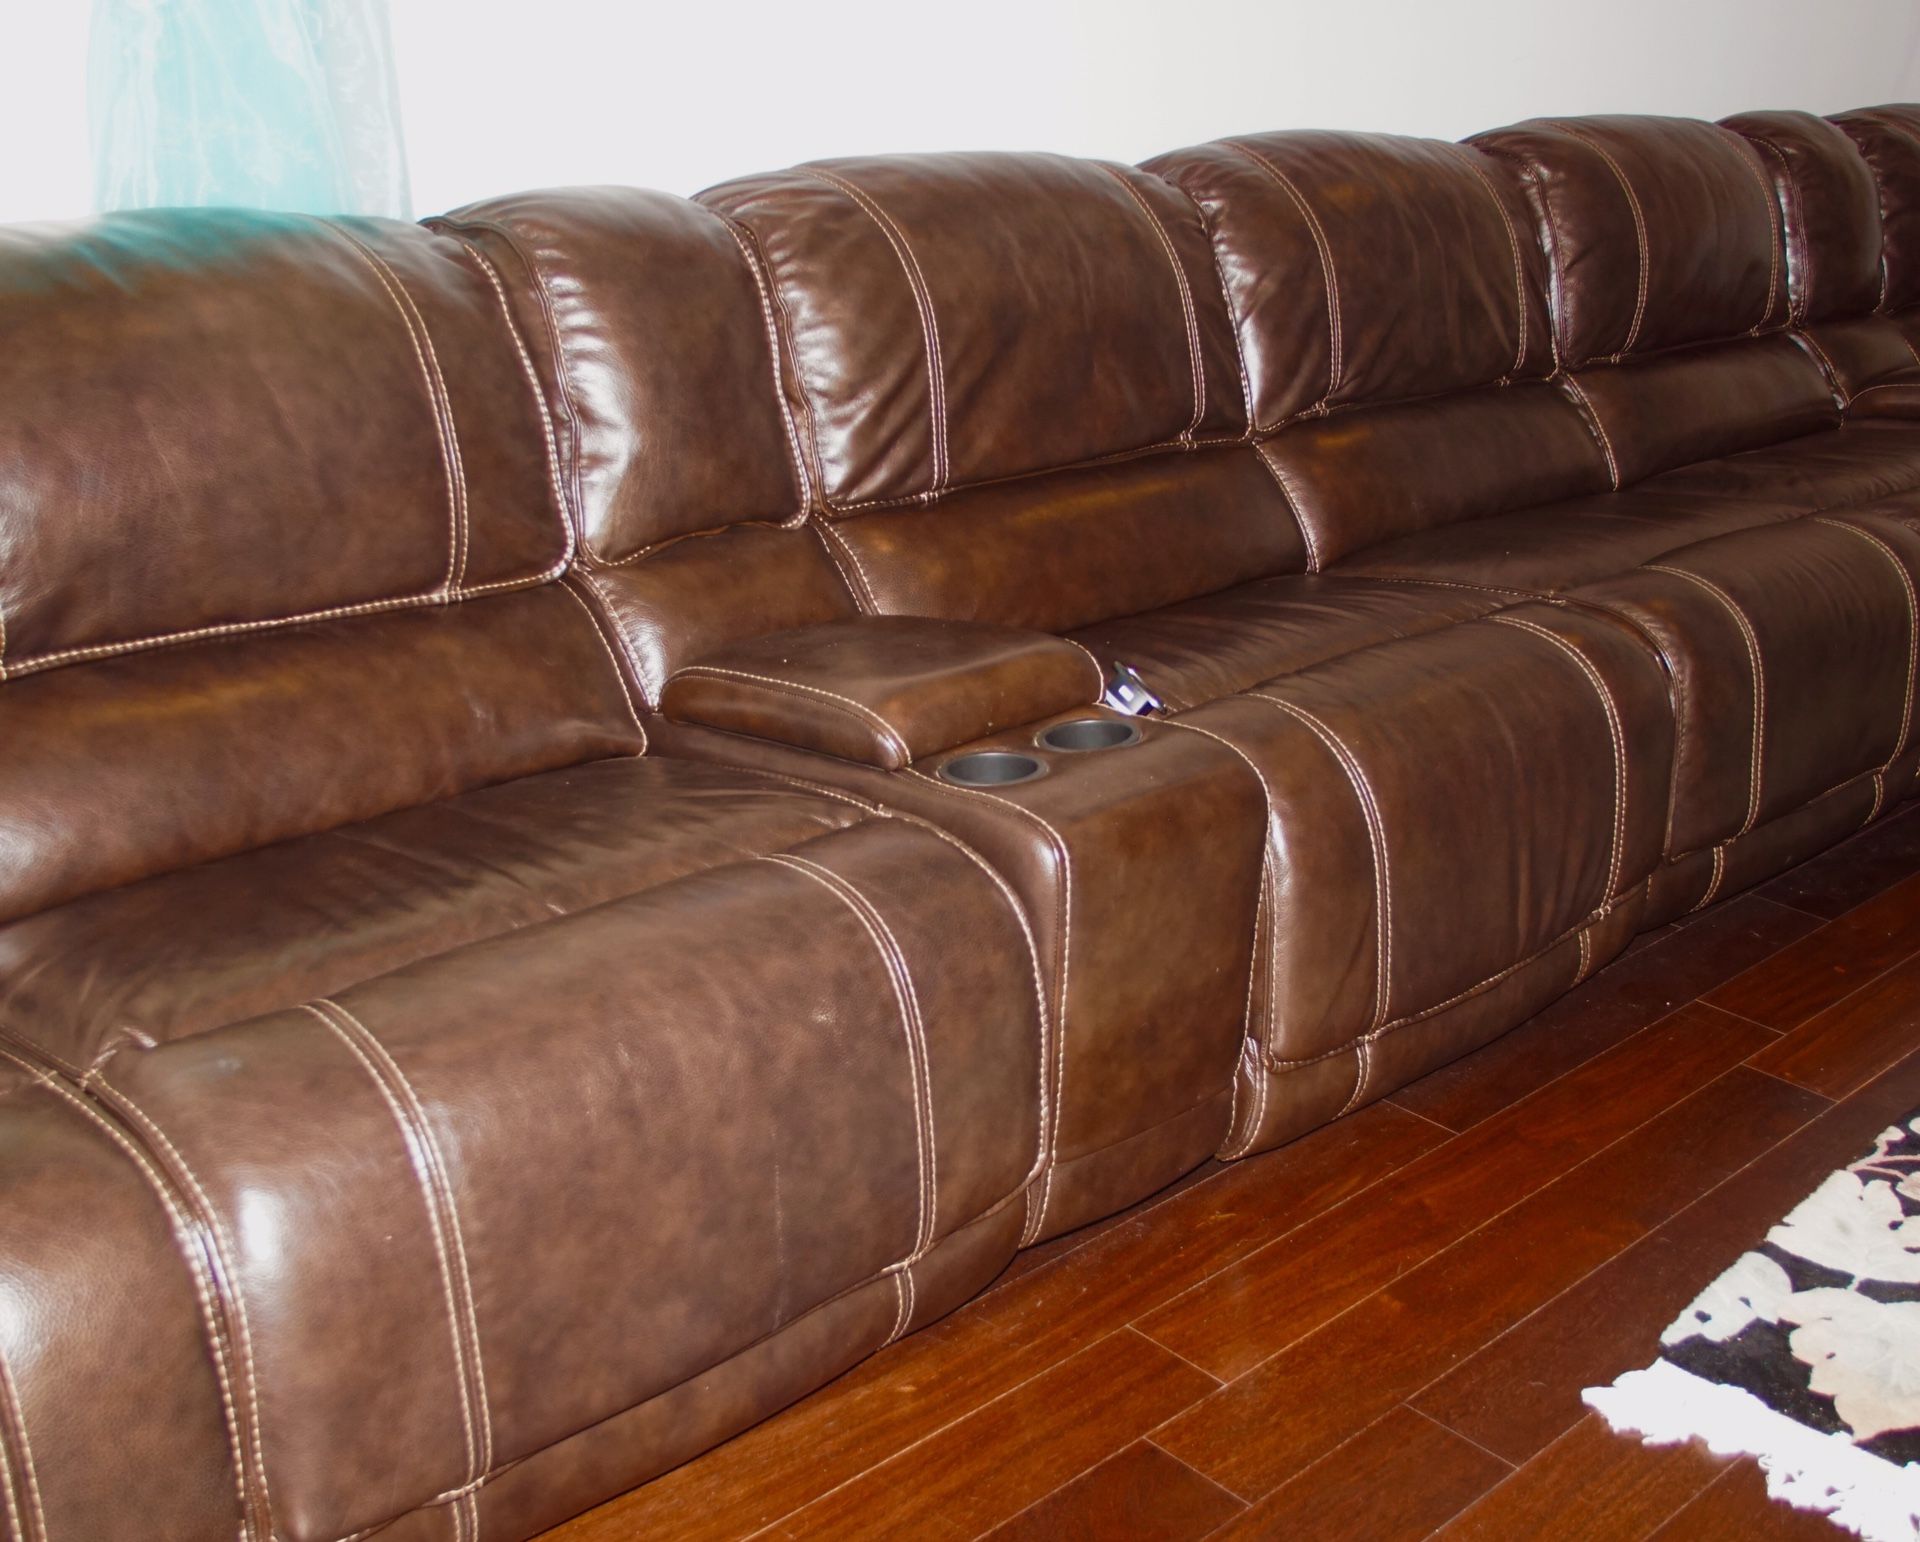 Fine Brown Leather Couch, All 4 pieces are recliners.